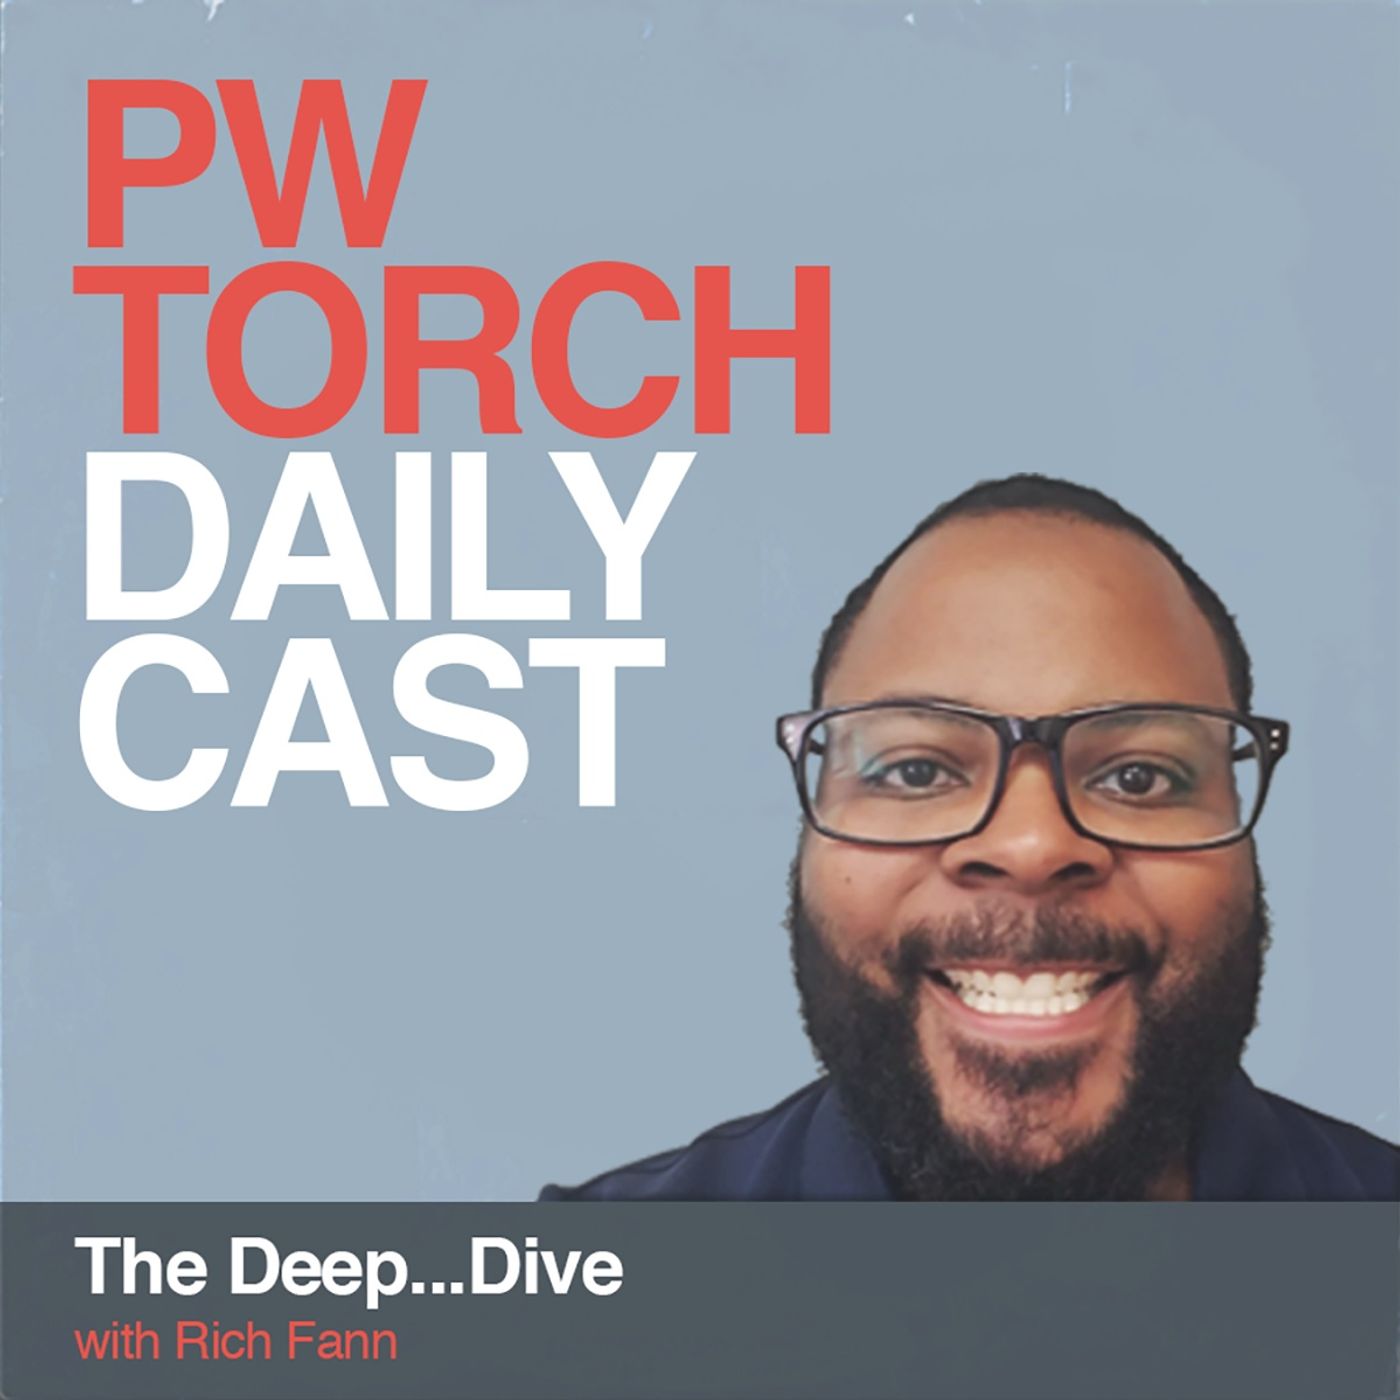 PWTorch Dailycast - The Deep...Dive w/Fann - Will Cooling and Machel St. Patrick Hewitt (@MashStPaddy) discuss diversity in AEW, more